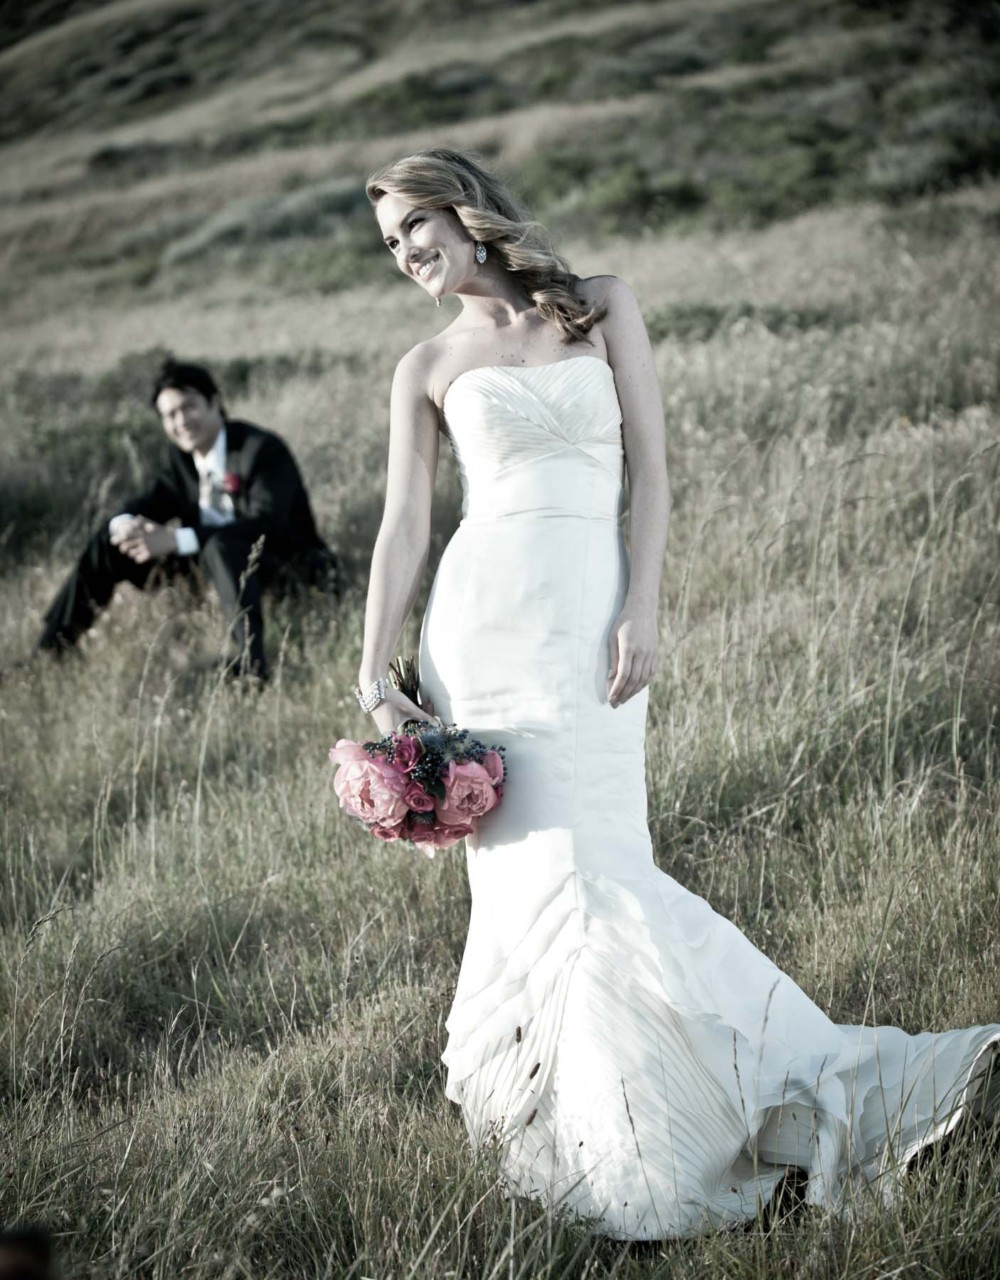 Looking for a affordable wedding photographer in Big Lake?